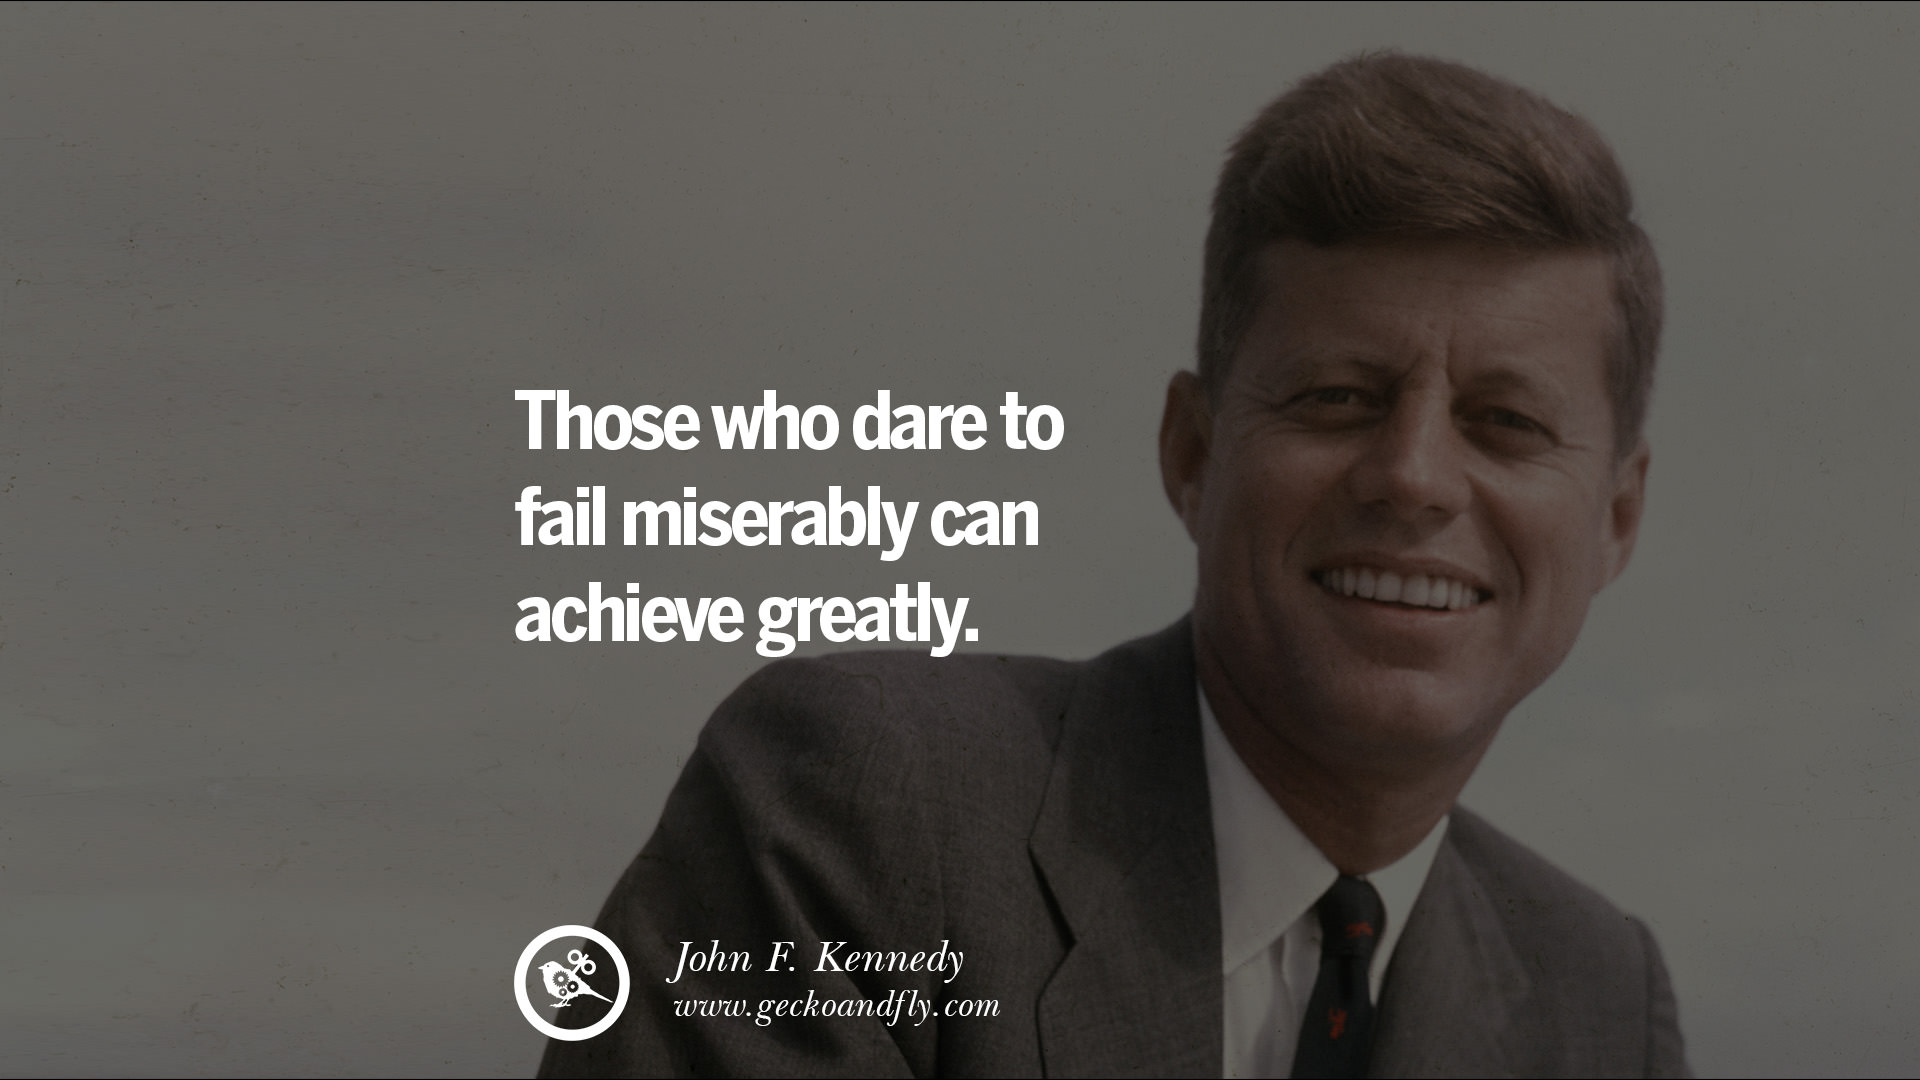 16 Famous President John F. Kennedy Quotes on Freedom 